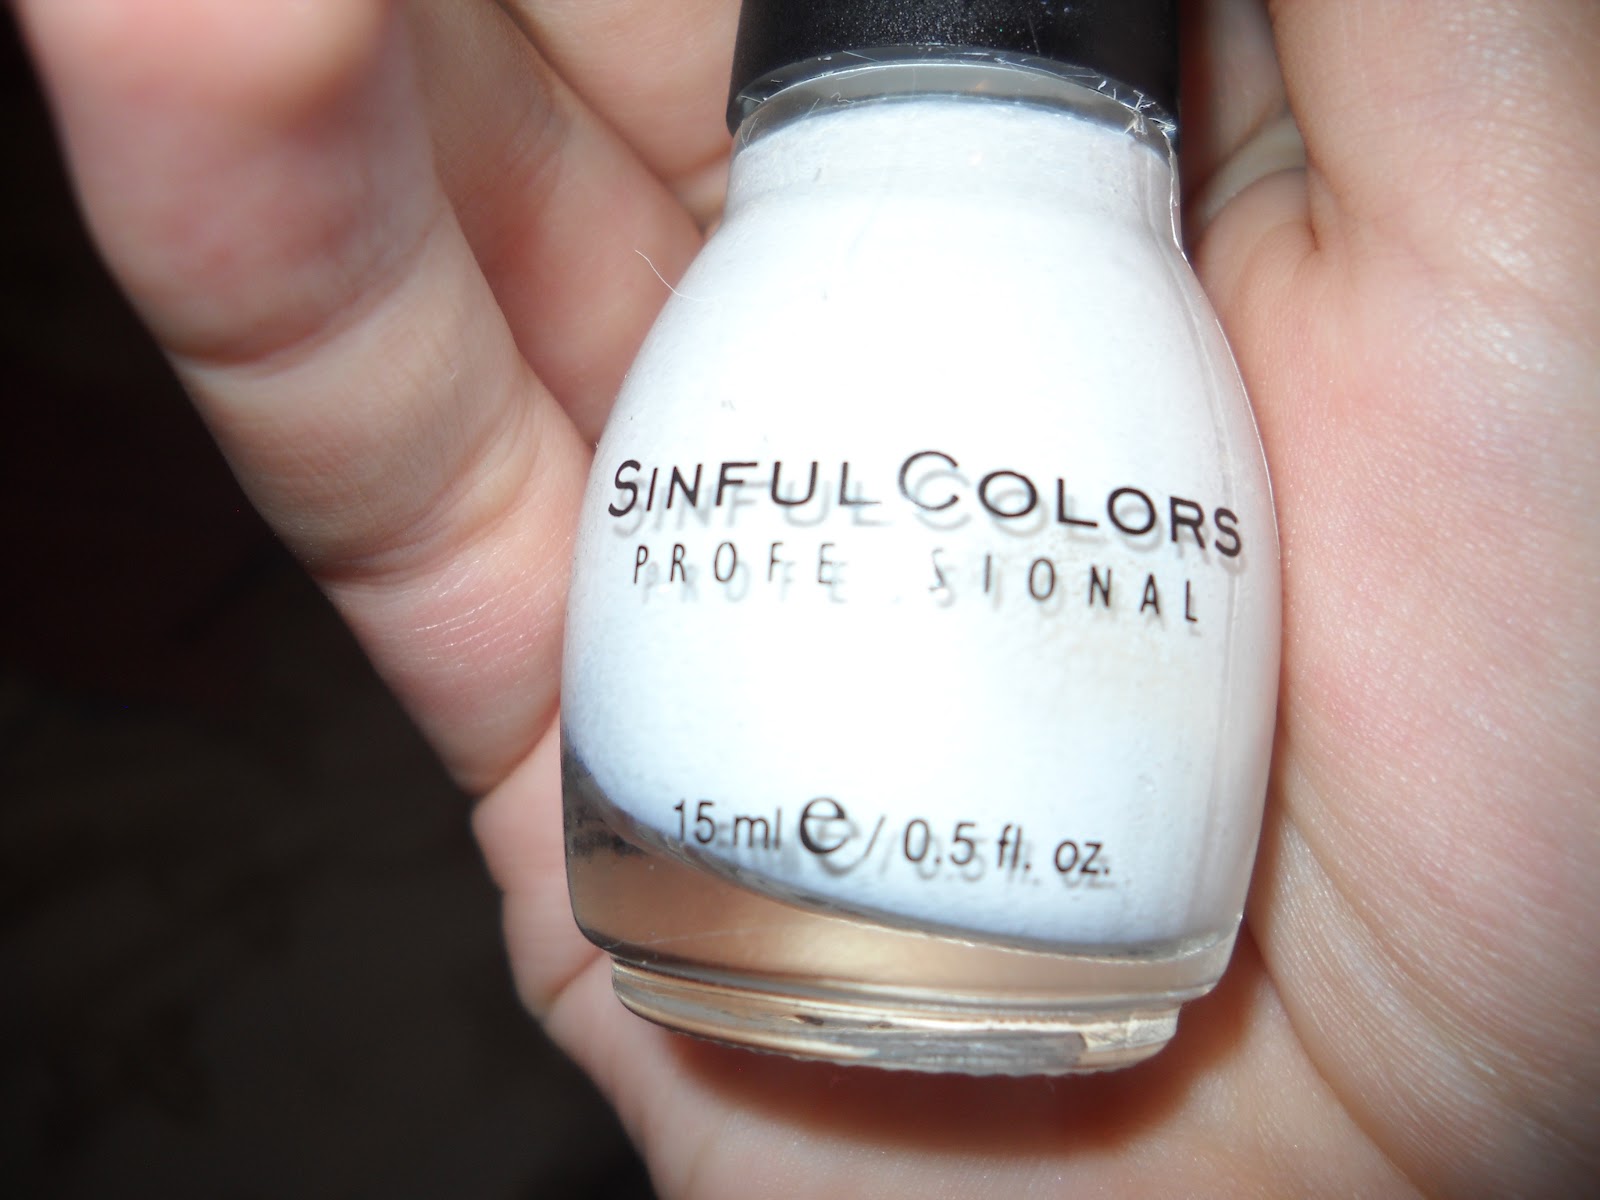 9. Sinful Colors Professional Nail Polish in "Snow Me White" - wide 3